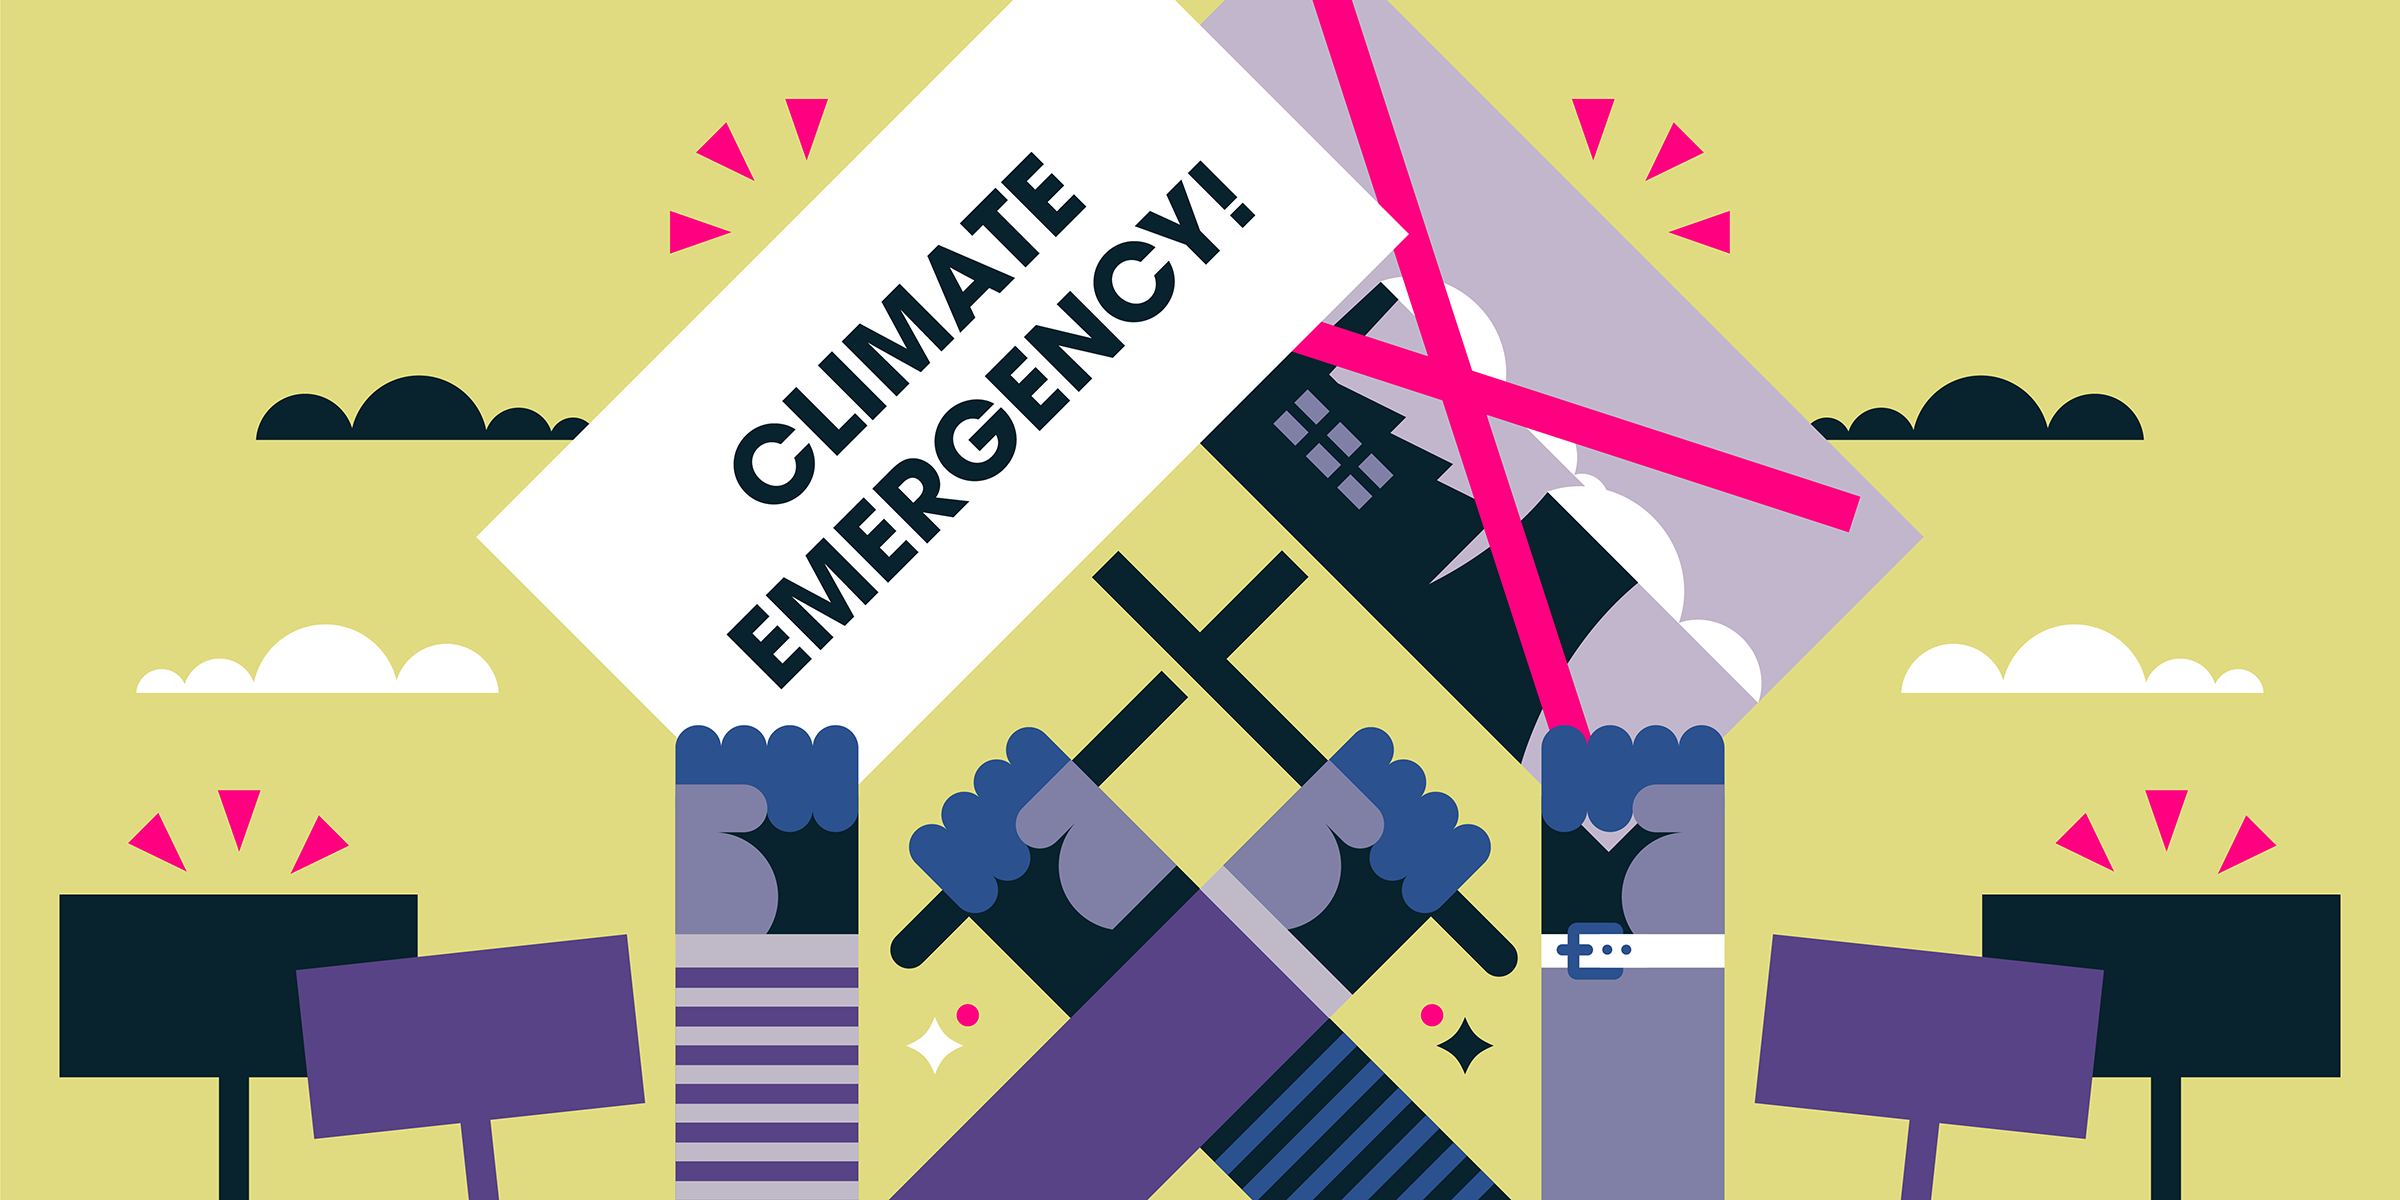 Why the UK has declared a climate emergency